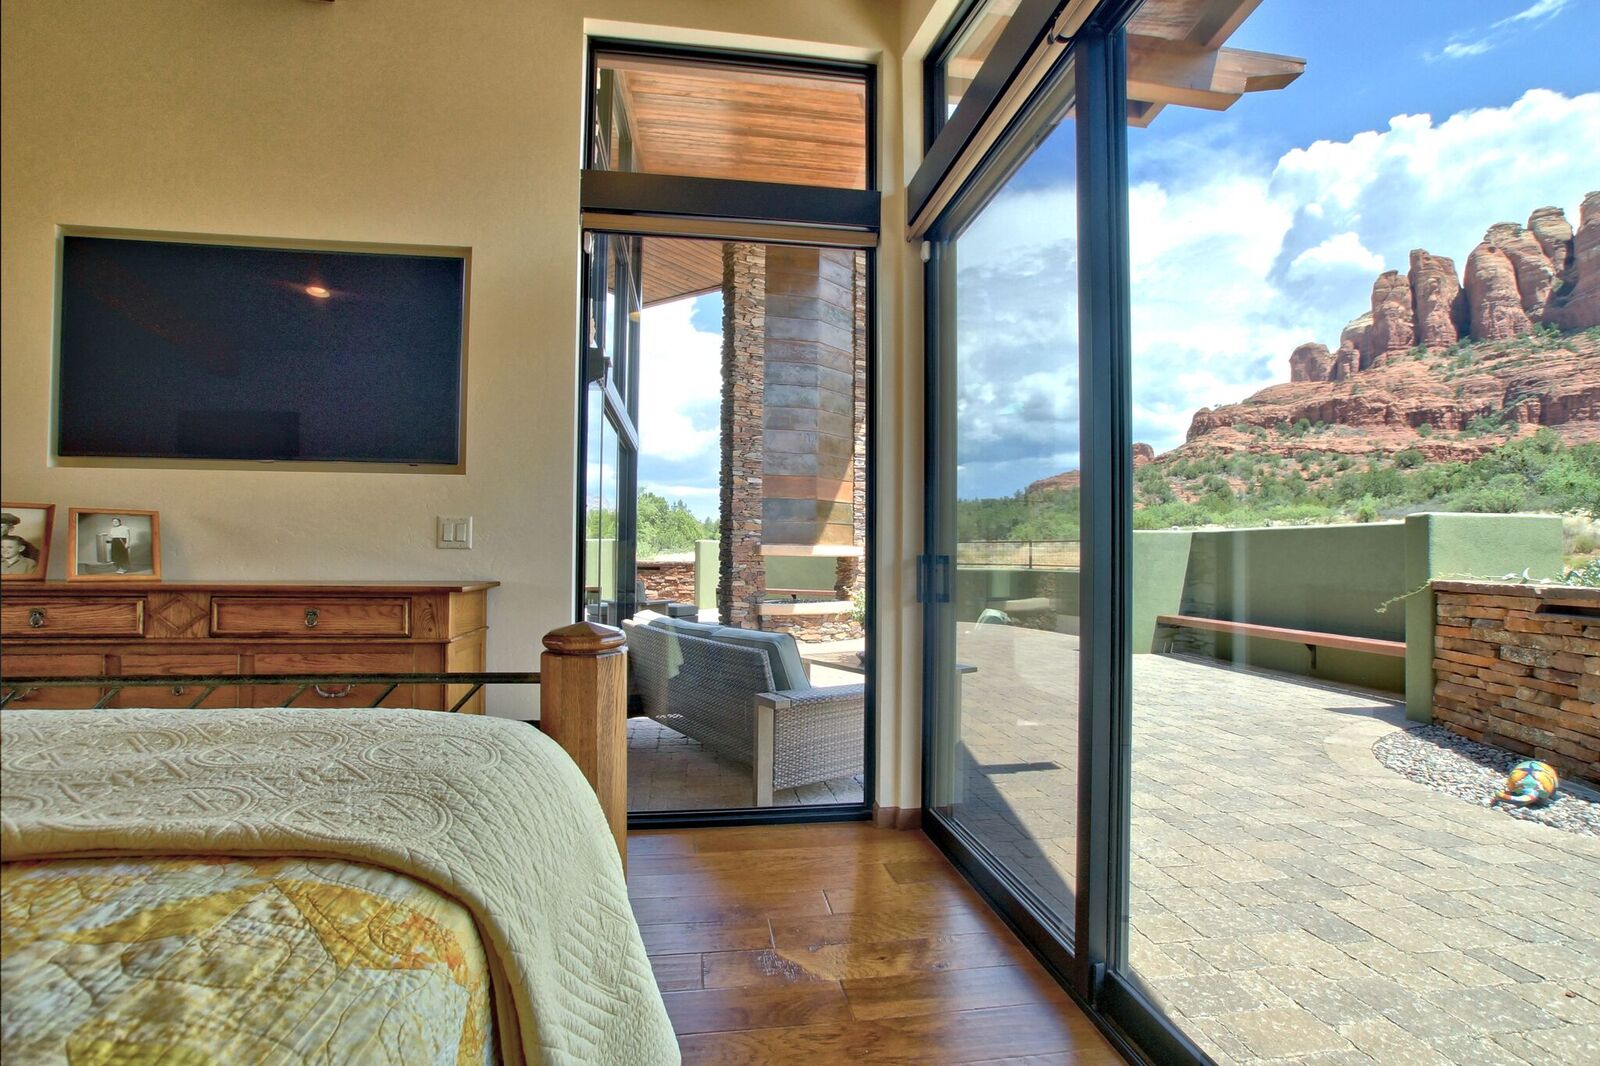 A bedroom with sliding glass doors open to the patio.